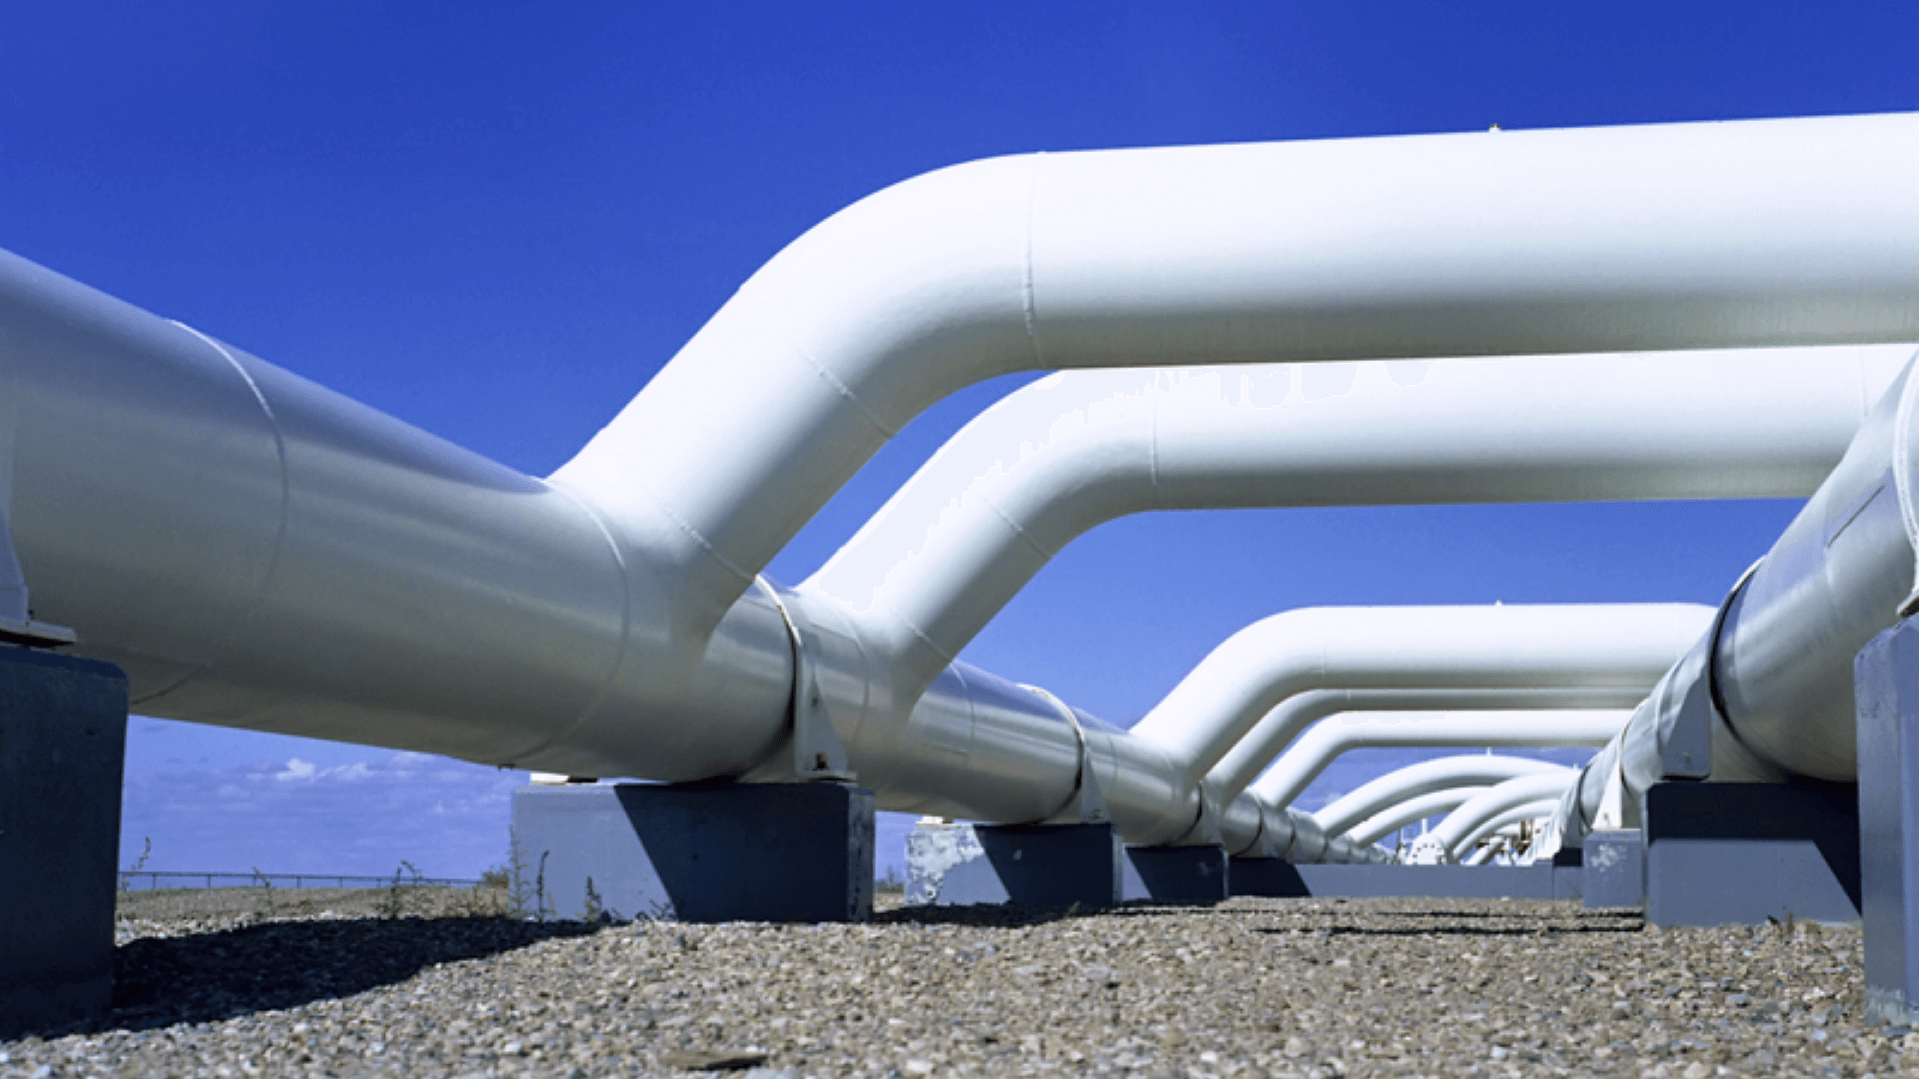 White gas pipelines with a background of blue sky